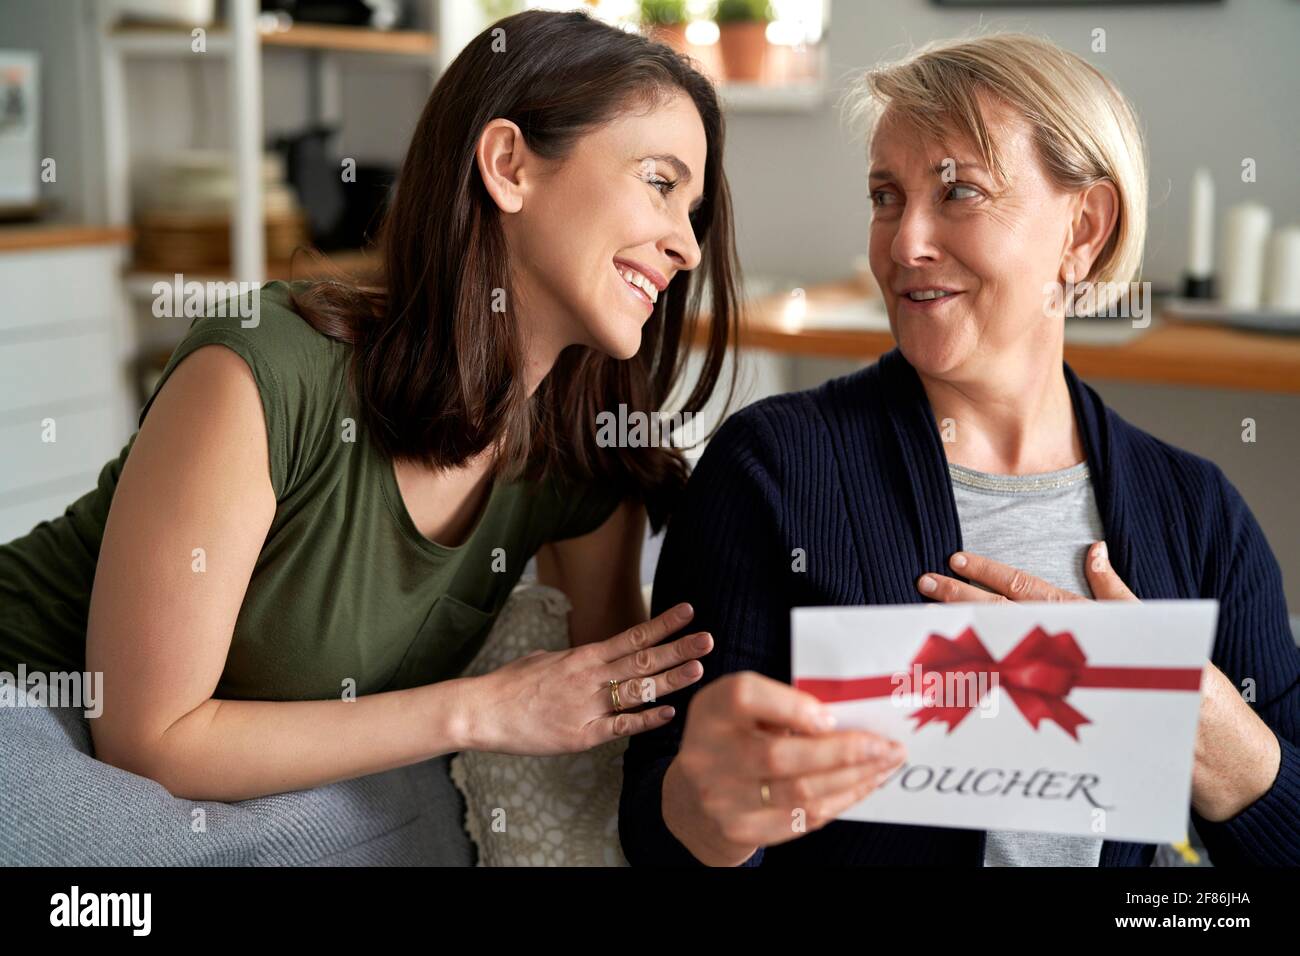 Mother is surprised by the gift from her daughter Stock Photo